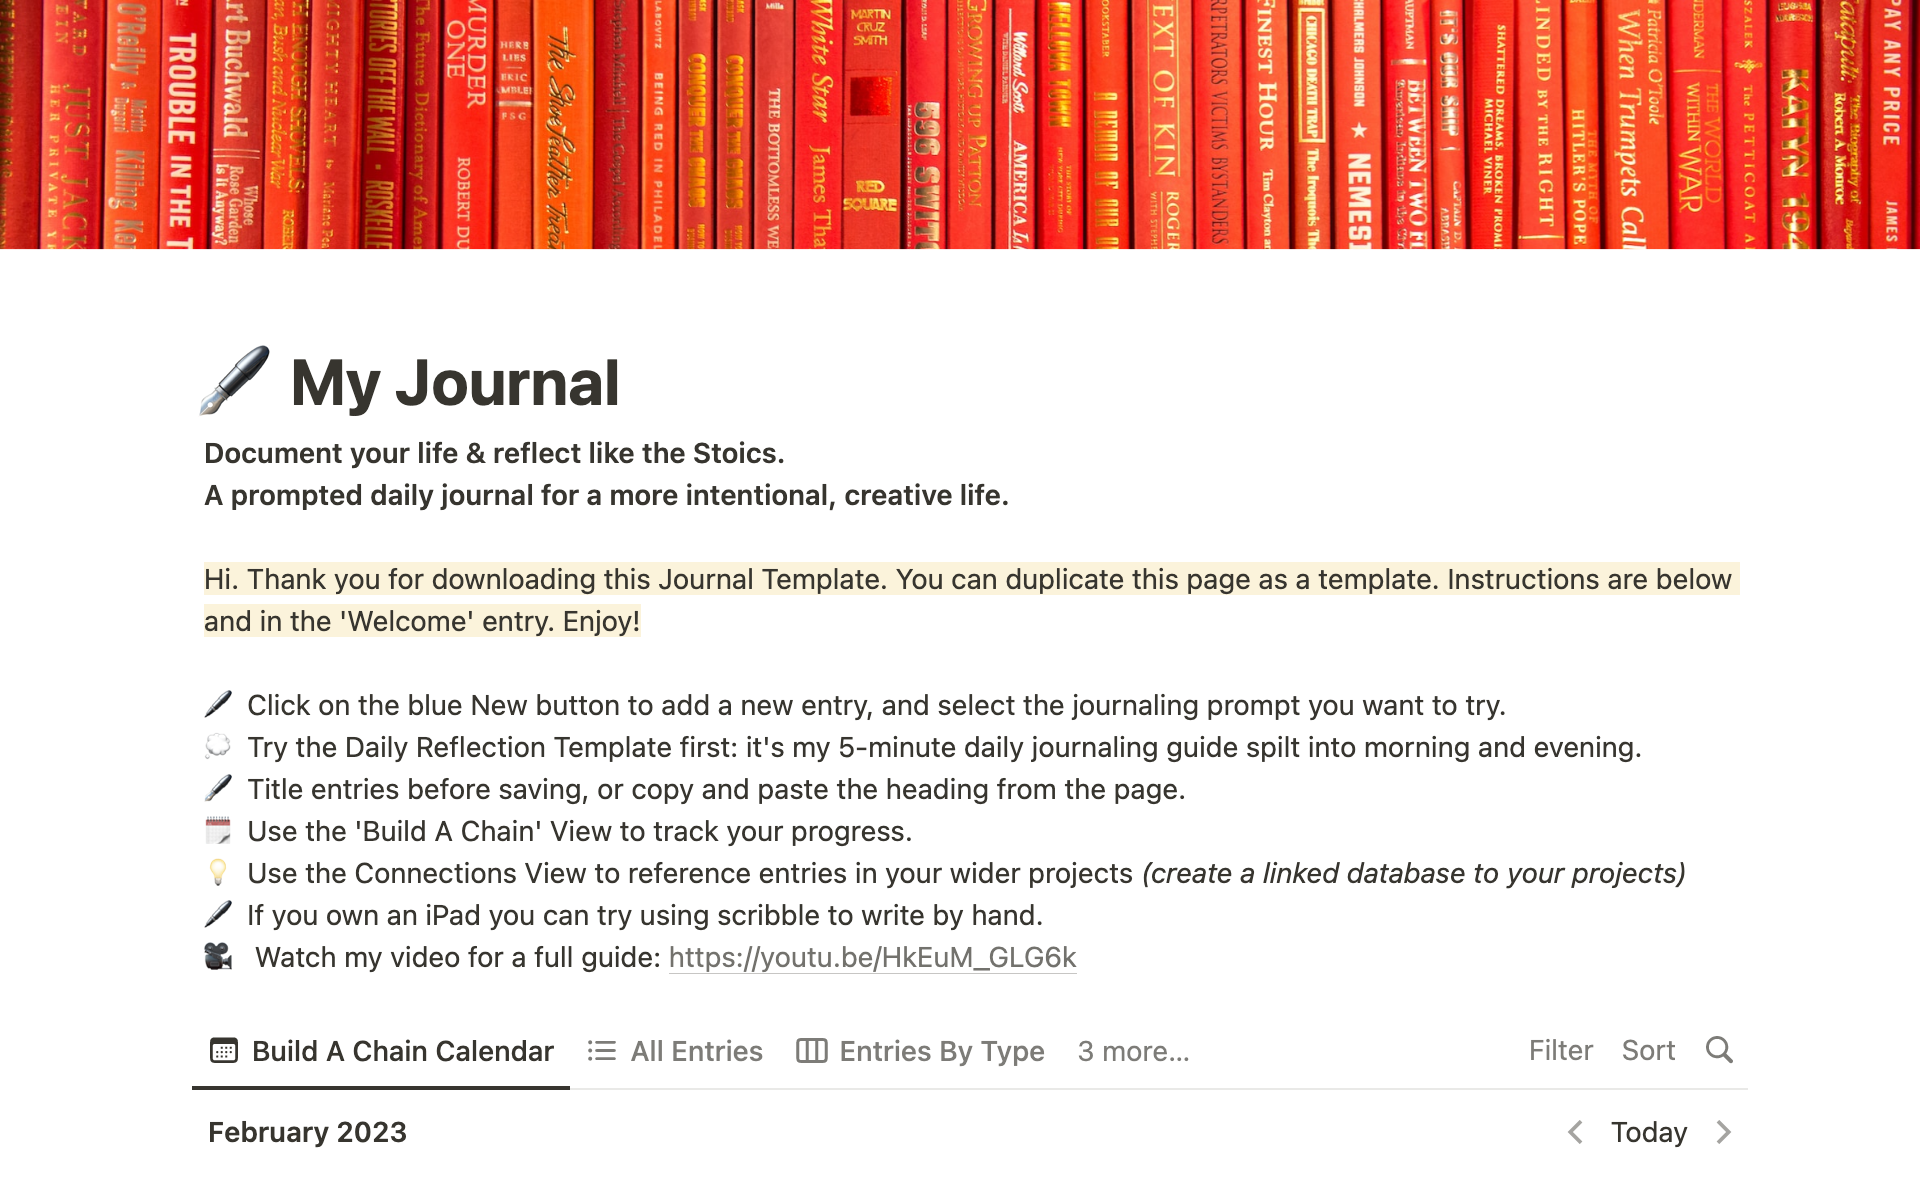 A daily journaling system with 14 prompted templates inspired by the Stoics and other contemporary journaling approaches.